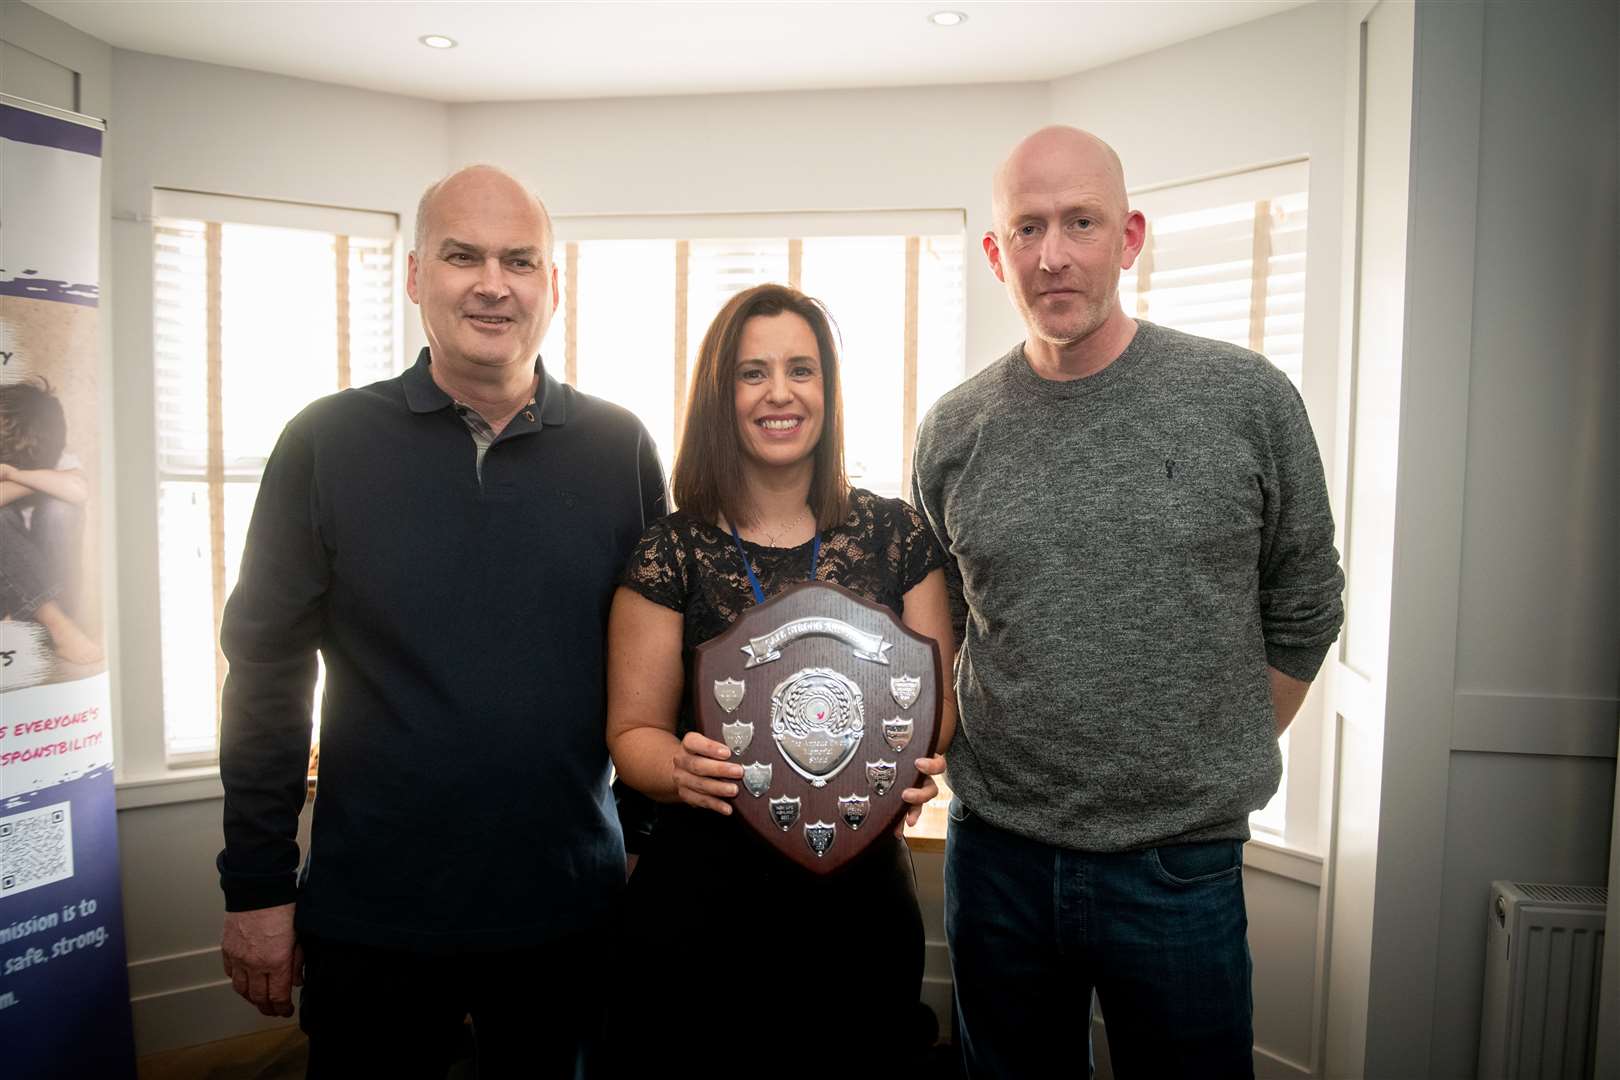 Paul Mackintosh (right) who recently climbed Mount Kilimanjaro on behalf of Safe, Strong and Free being presented with Annette Ewen Memorial Shield by Managing Director Donald Maclachlan and Project Manager Kerry Lowe. Picture: Callum Mackay.